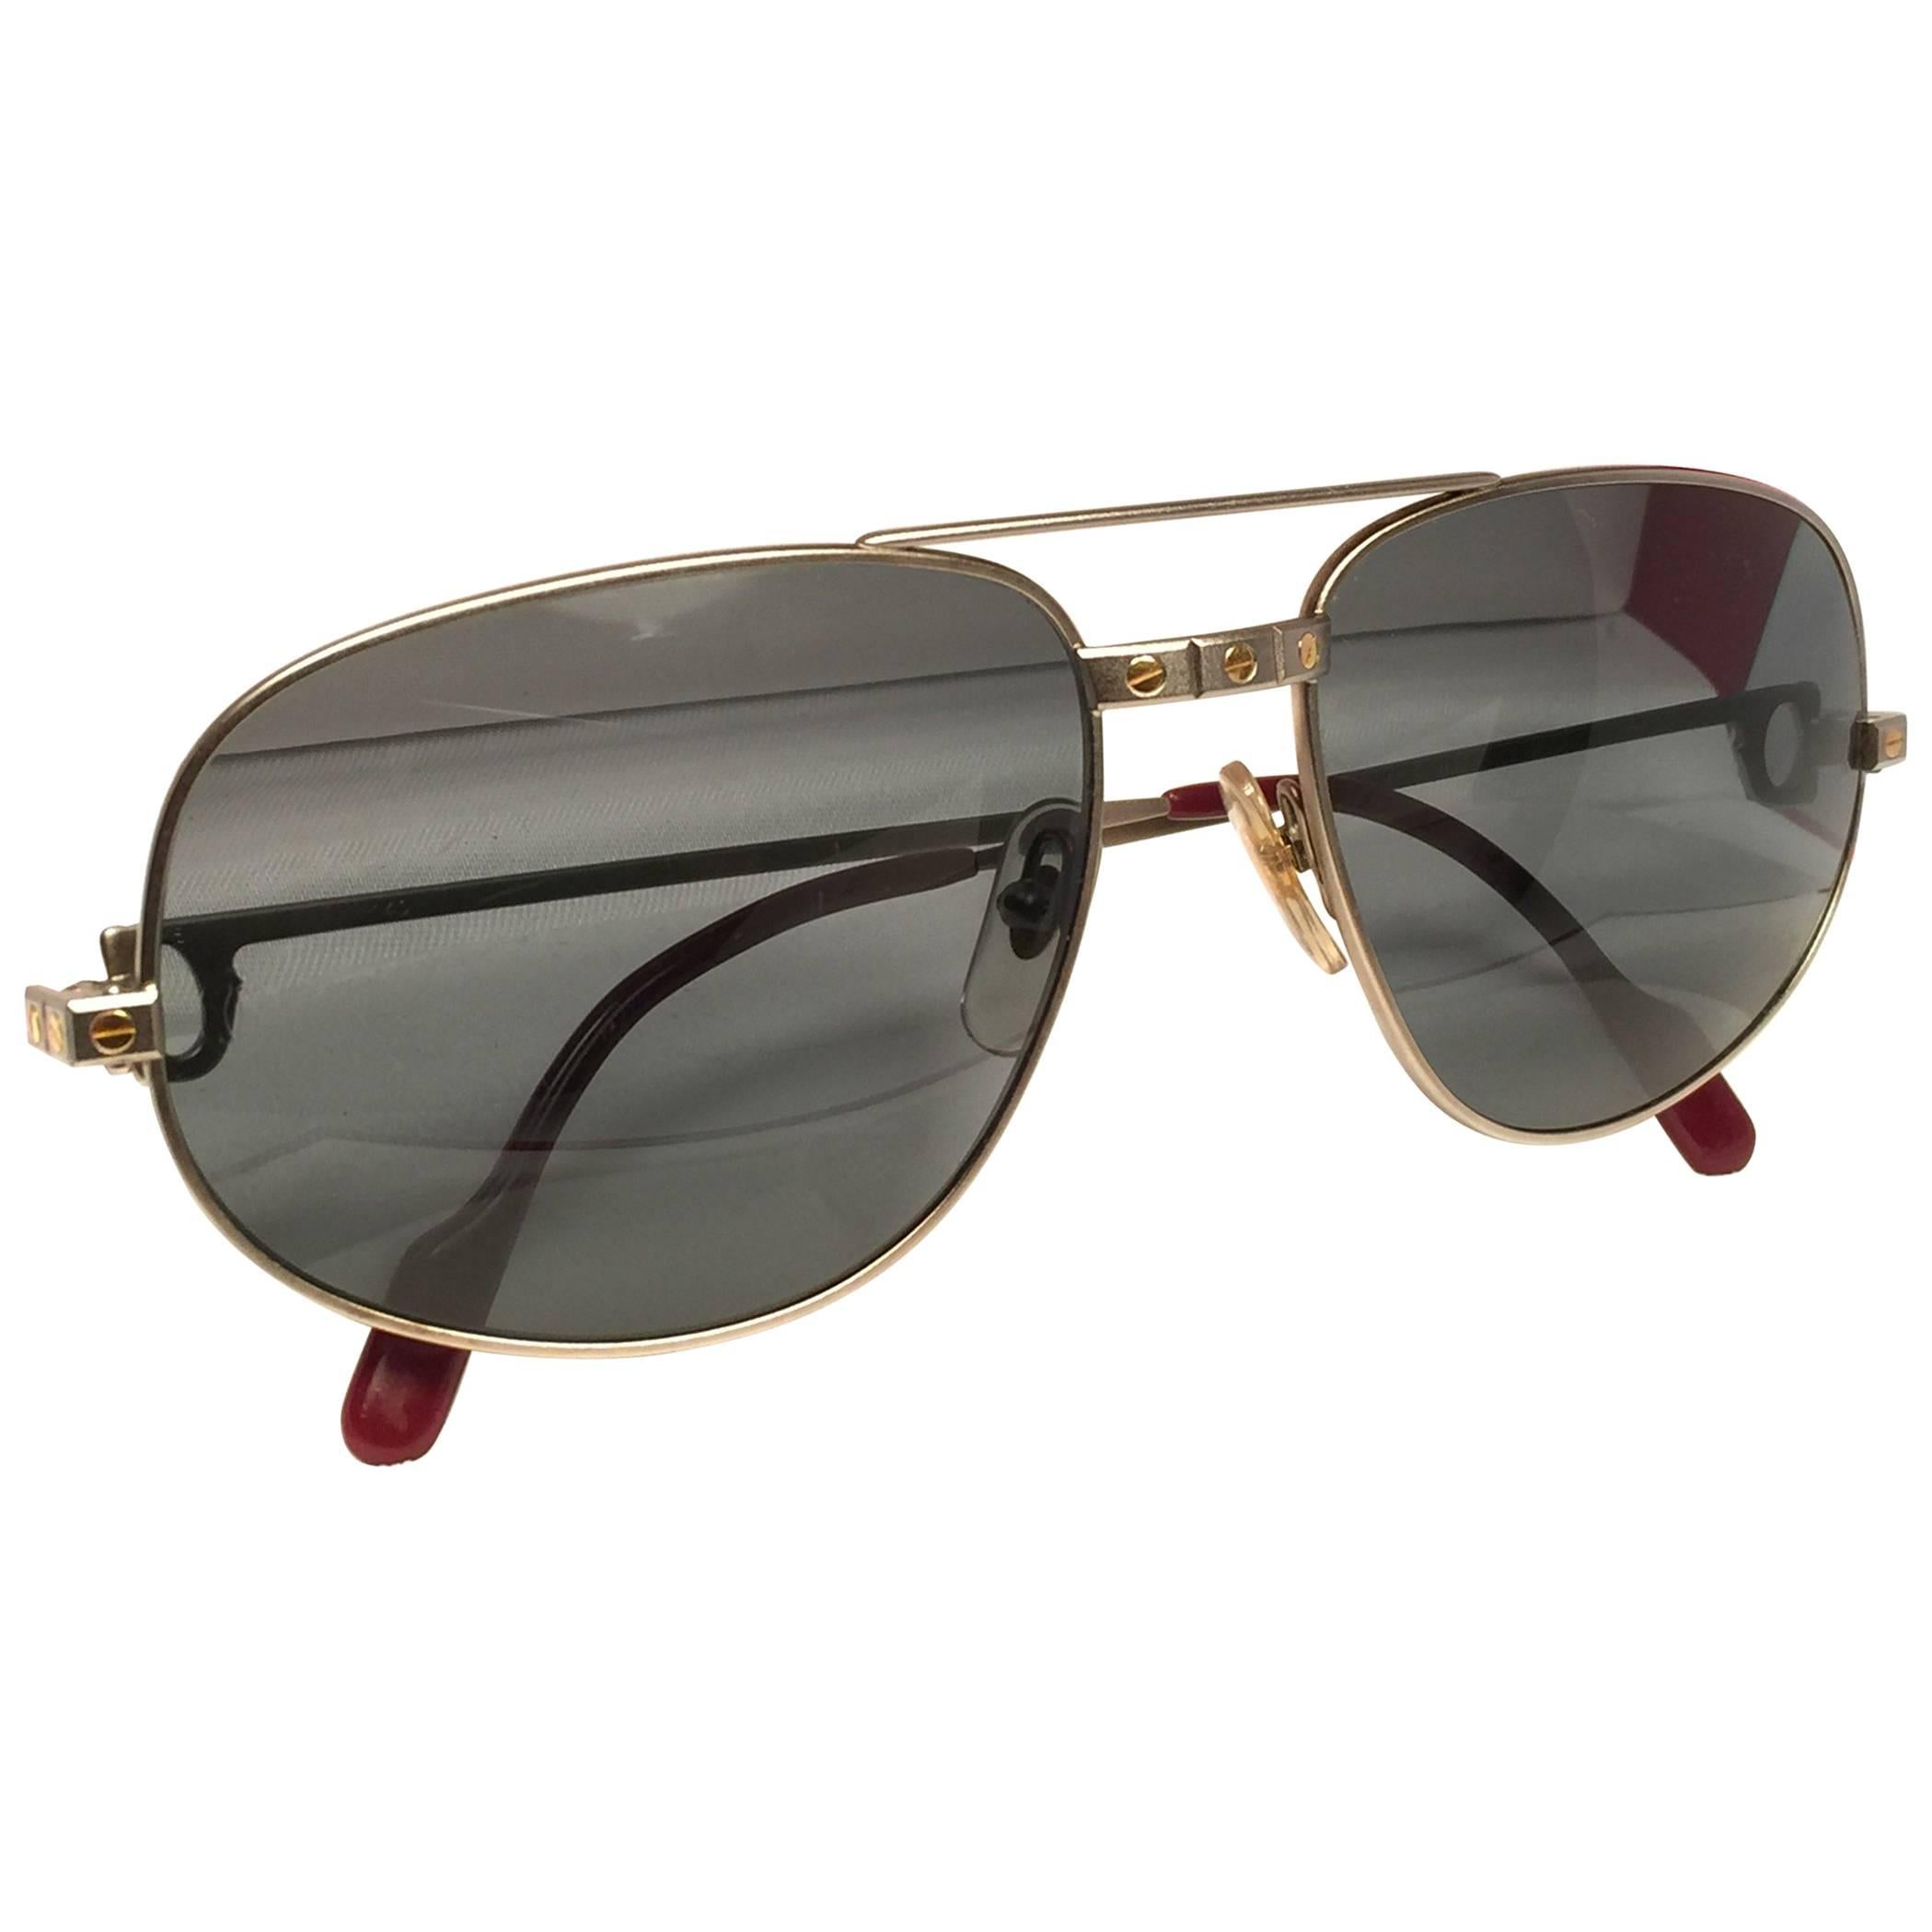 Vintage Cartier Romance Santos Titanium sunglasses with grey gradient (uv protection)lenses. Frame is with the front and sides in yellow and white gold. All hallmarks. Red enamel with Cartier gold signs on the ear paddles. Both arms sport the C from